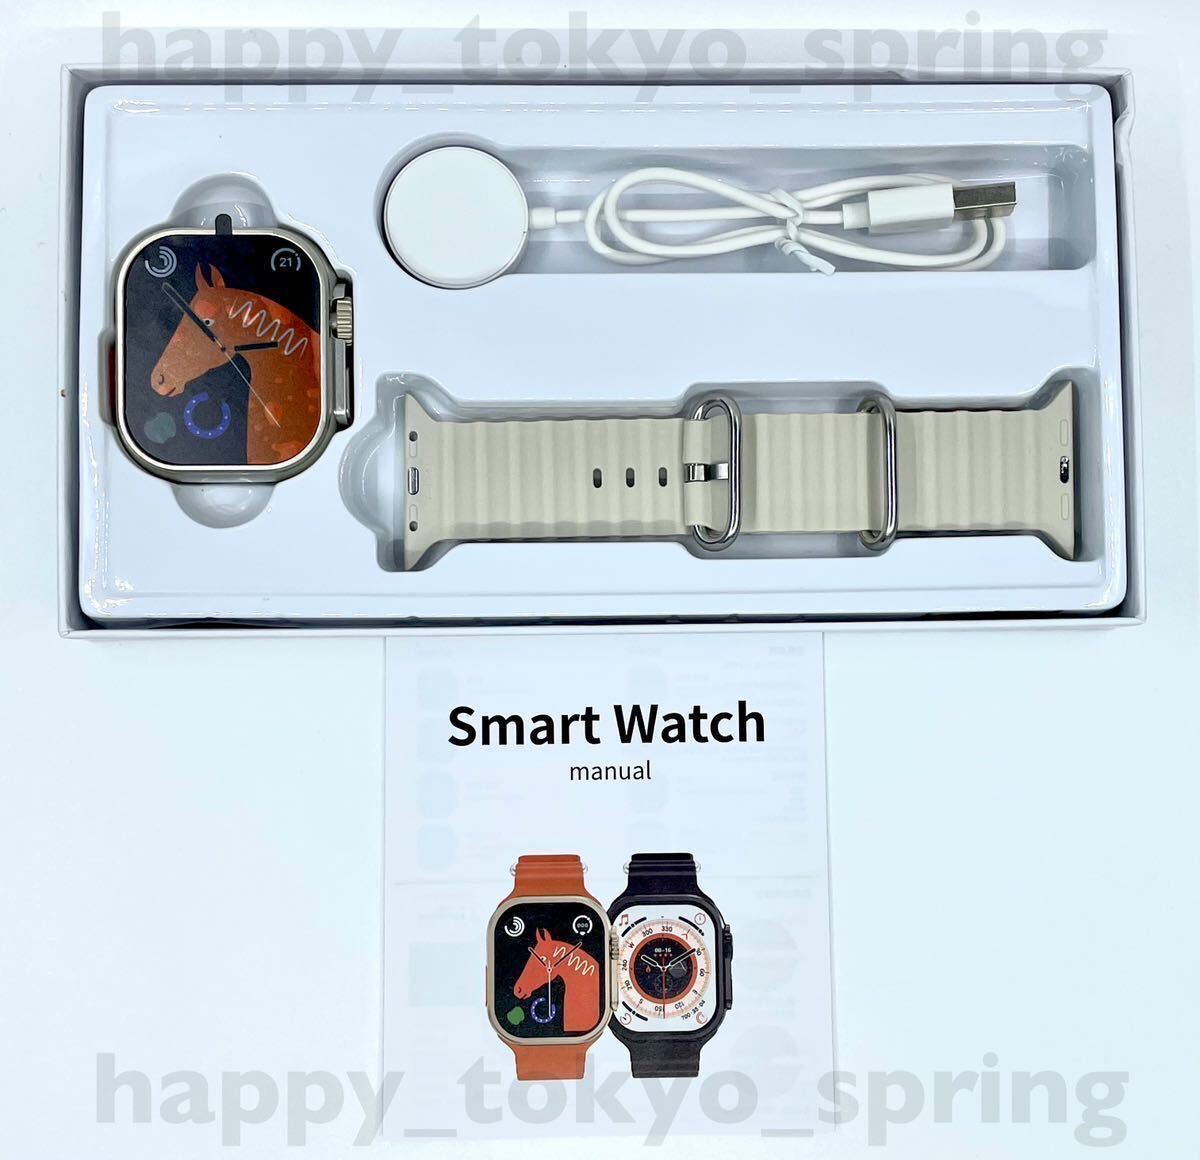  new goods Apple Watch Ultra2 substitute 2.19 -inch large screen S9 smart watch telephone call music multifunction health sport waterproof . middle oxygen android blood pressure 